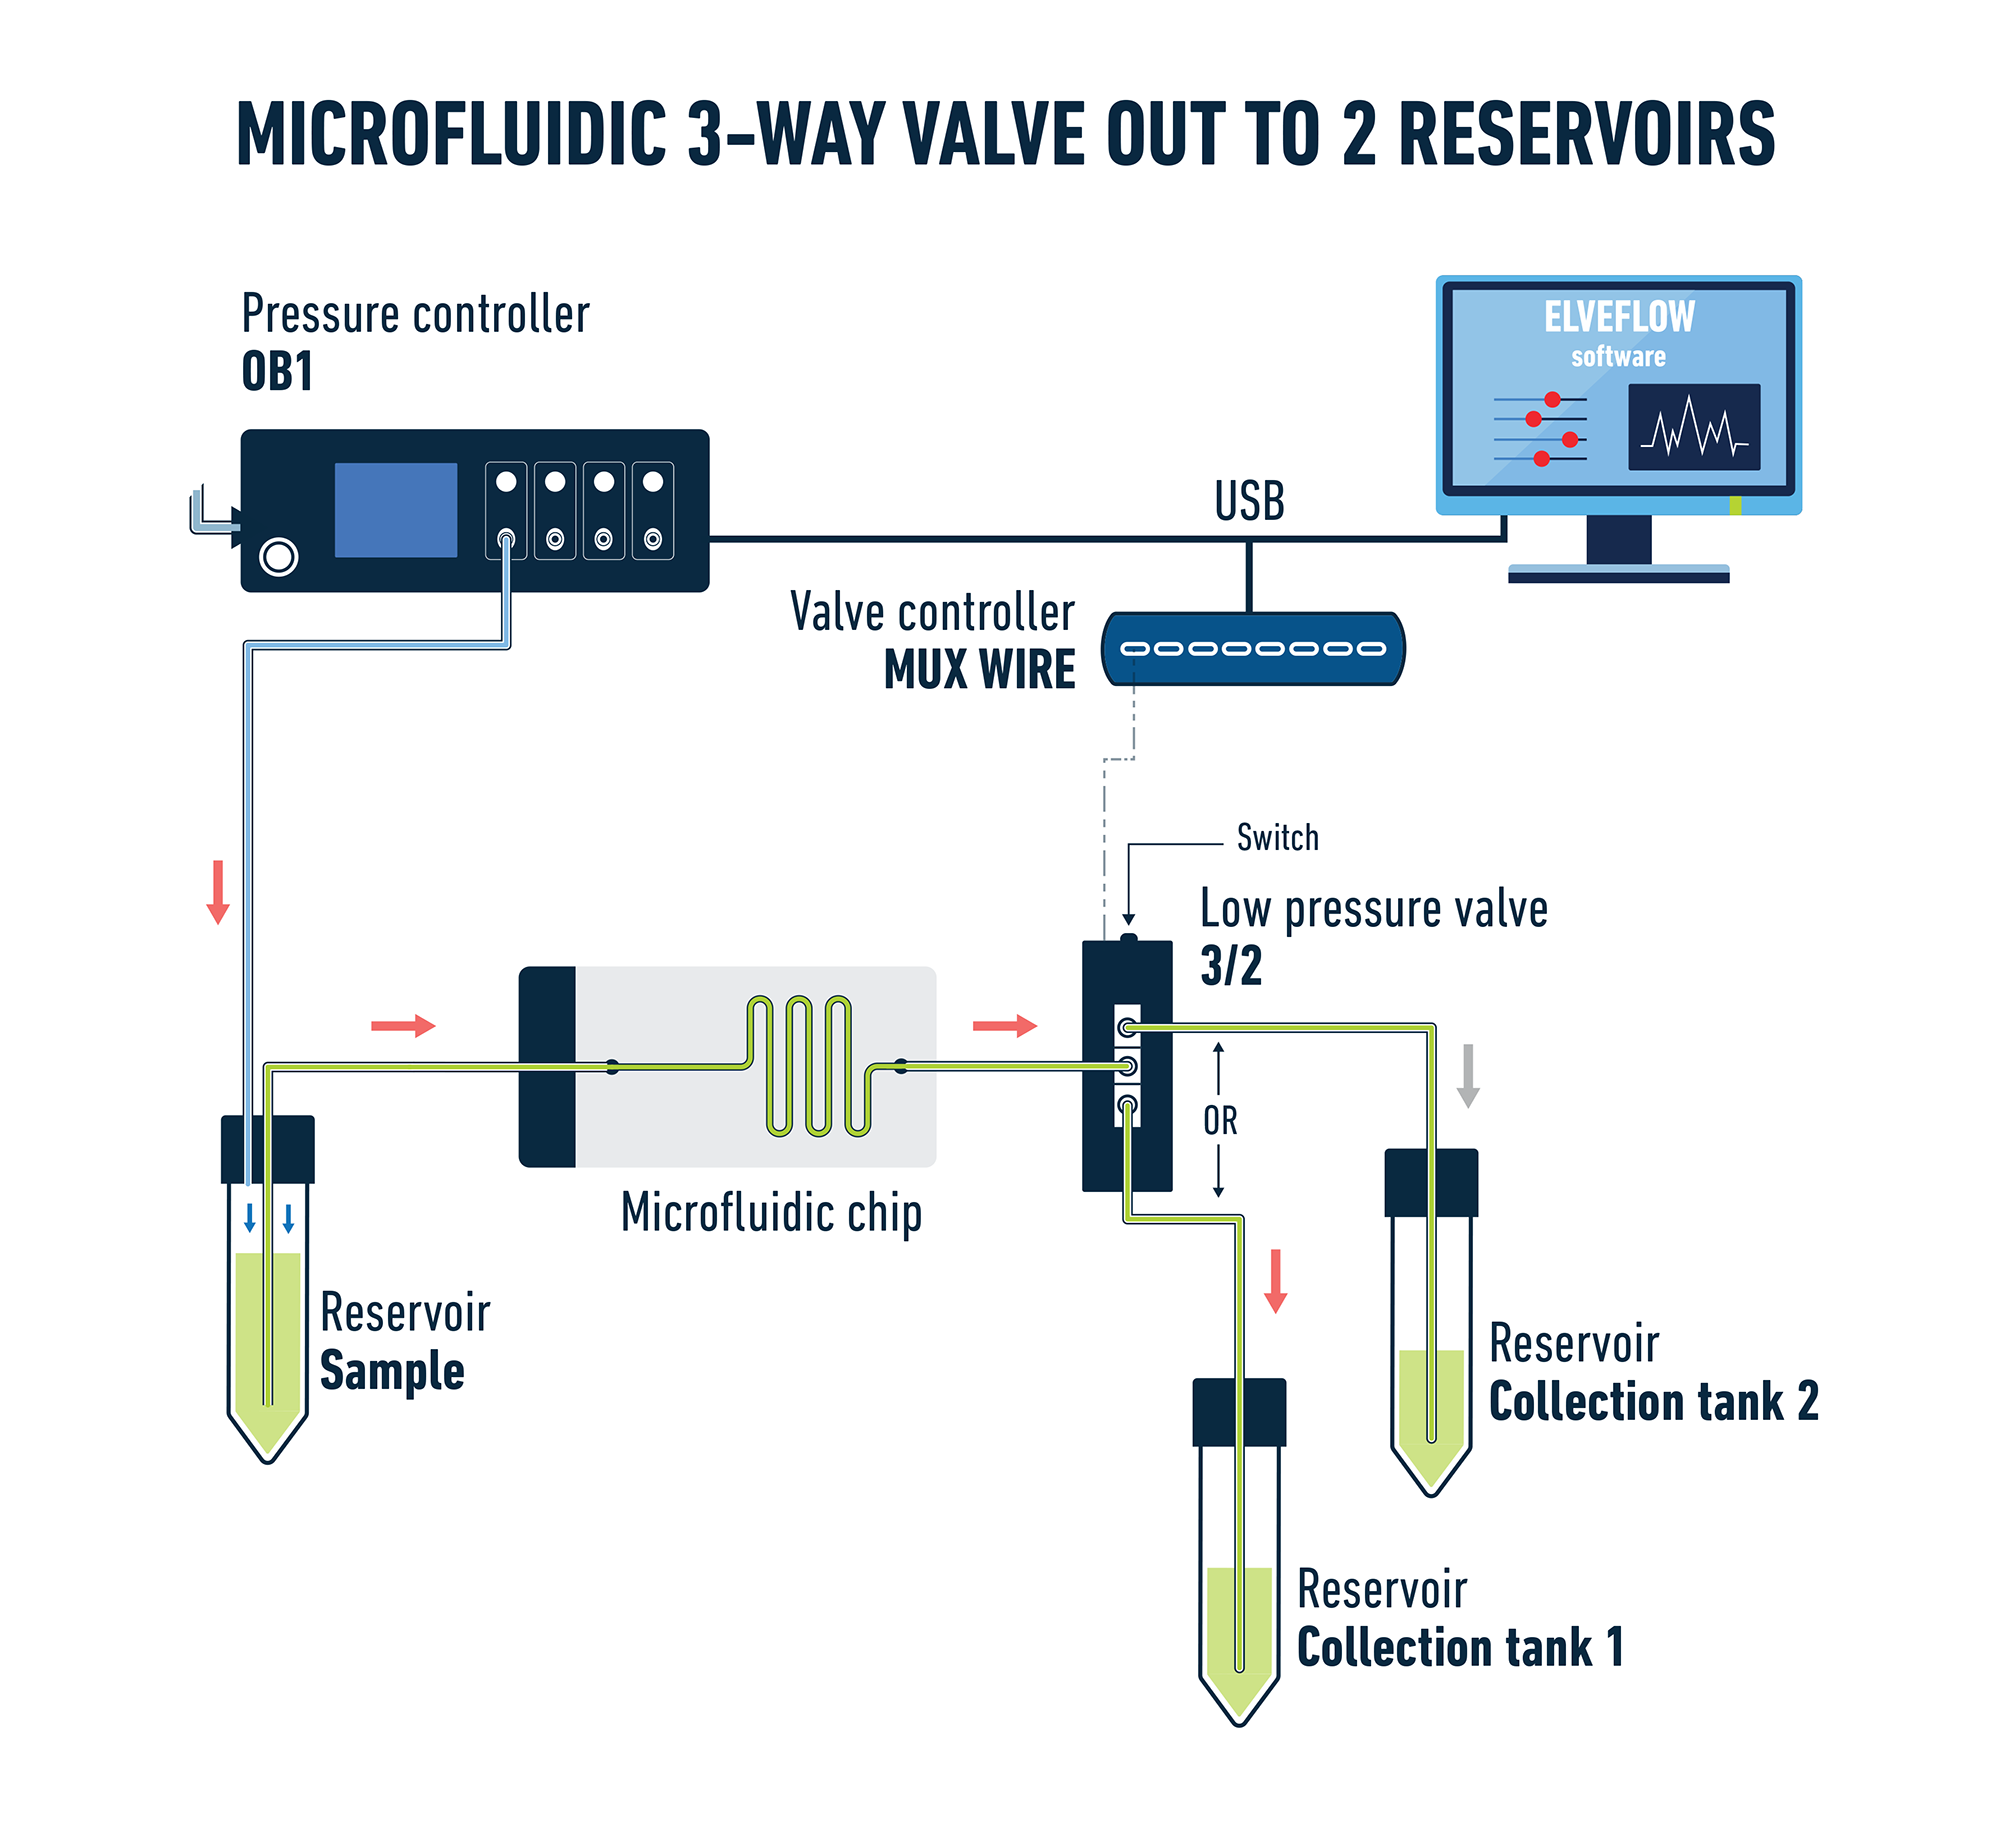 Schematic 3-way valve out to 2 reservoirs